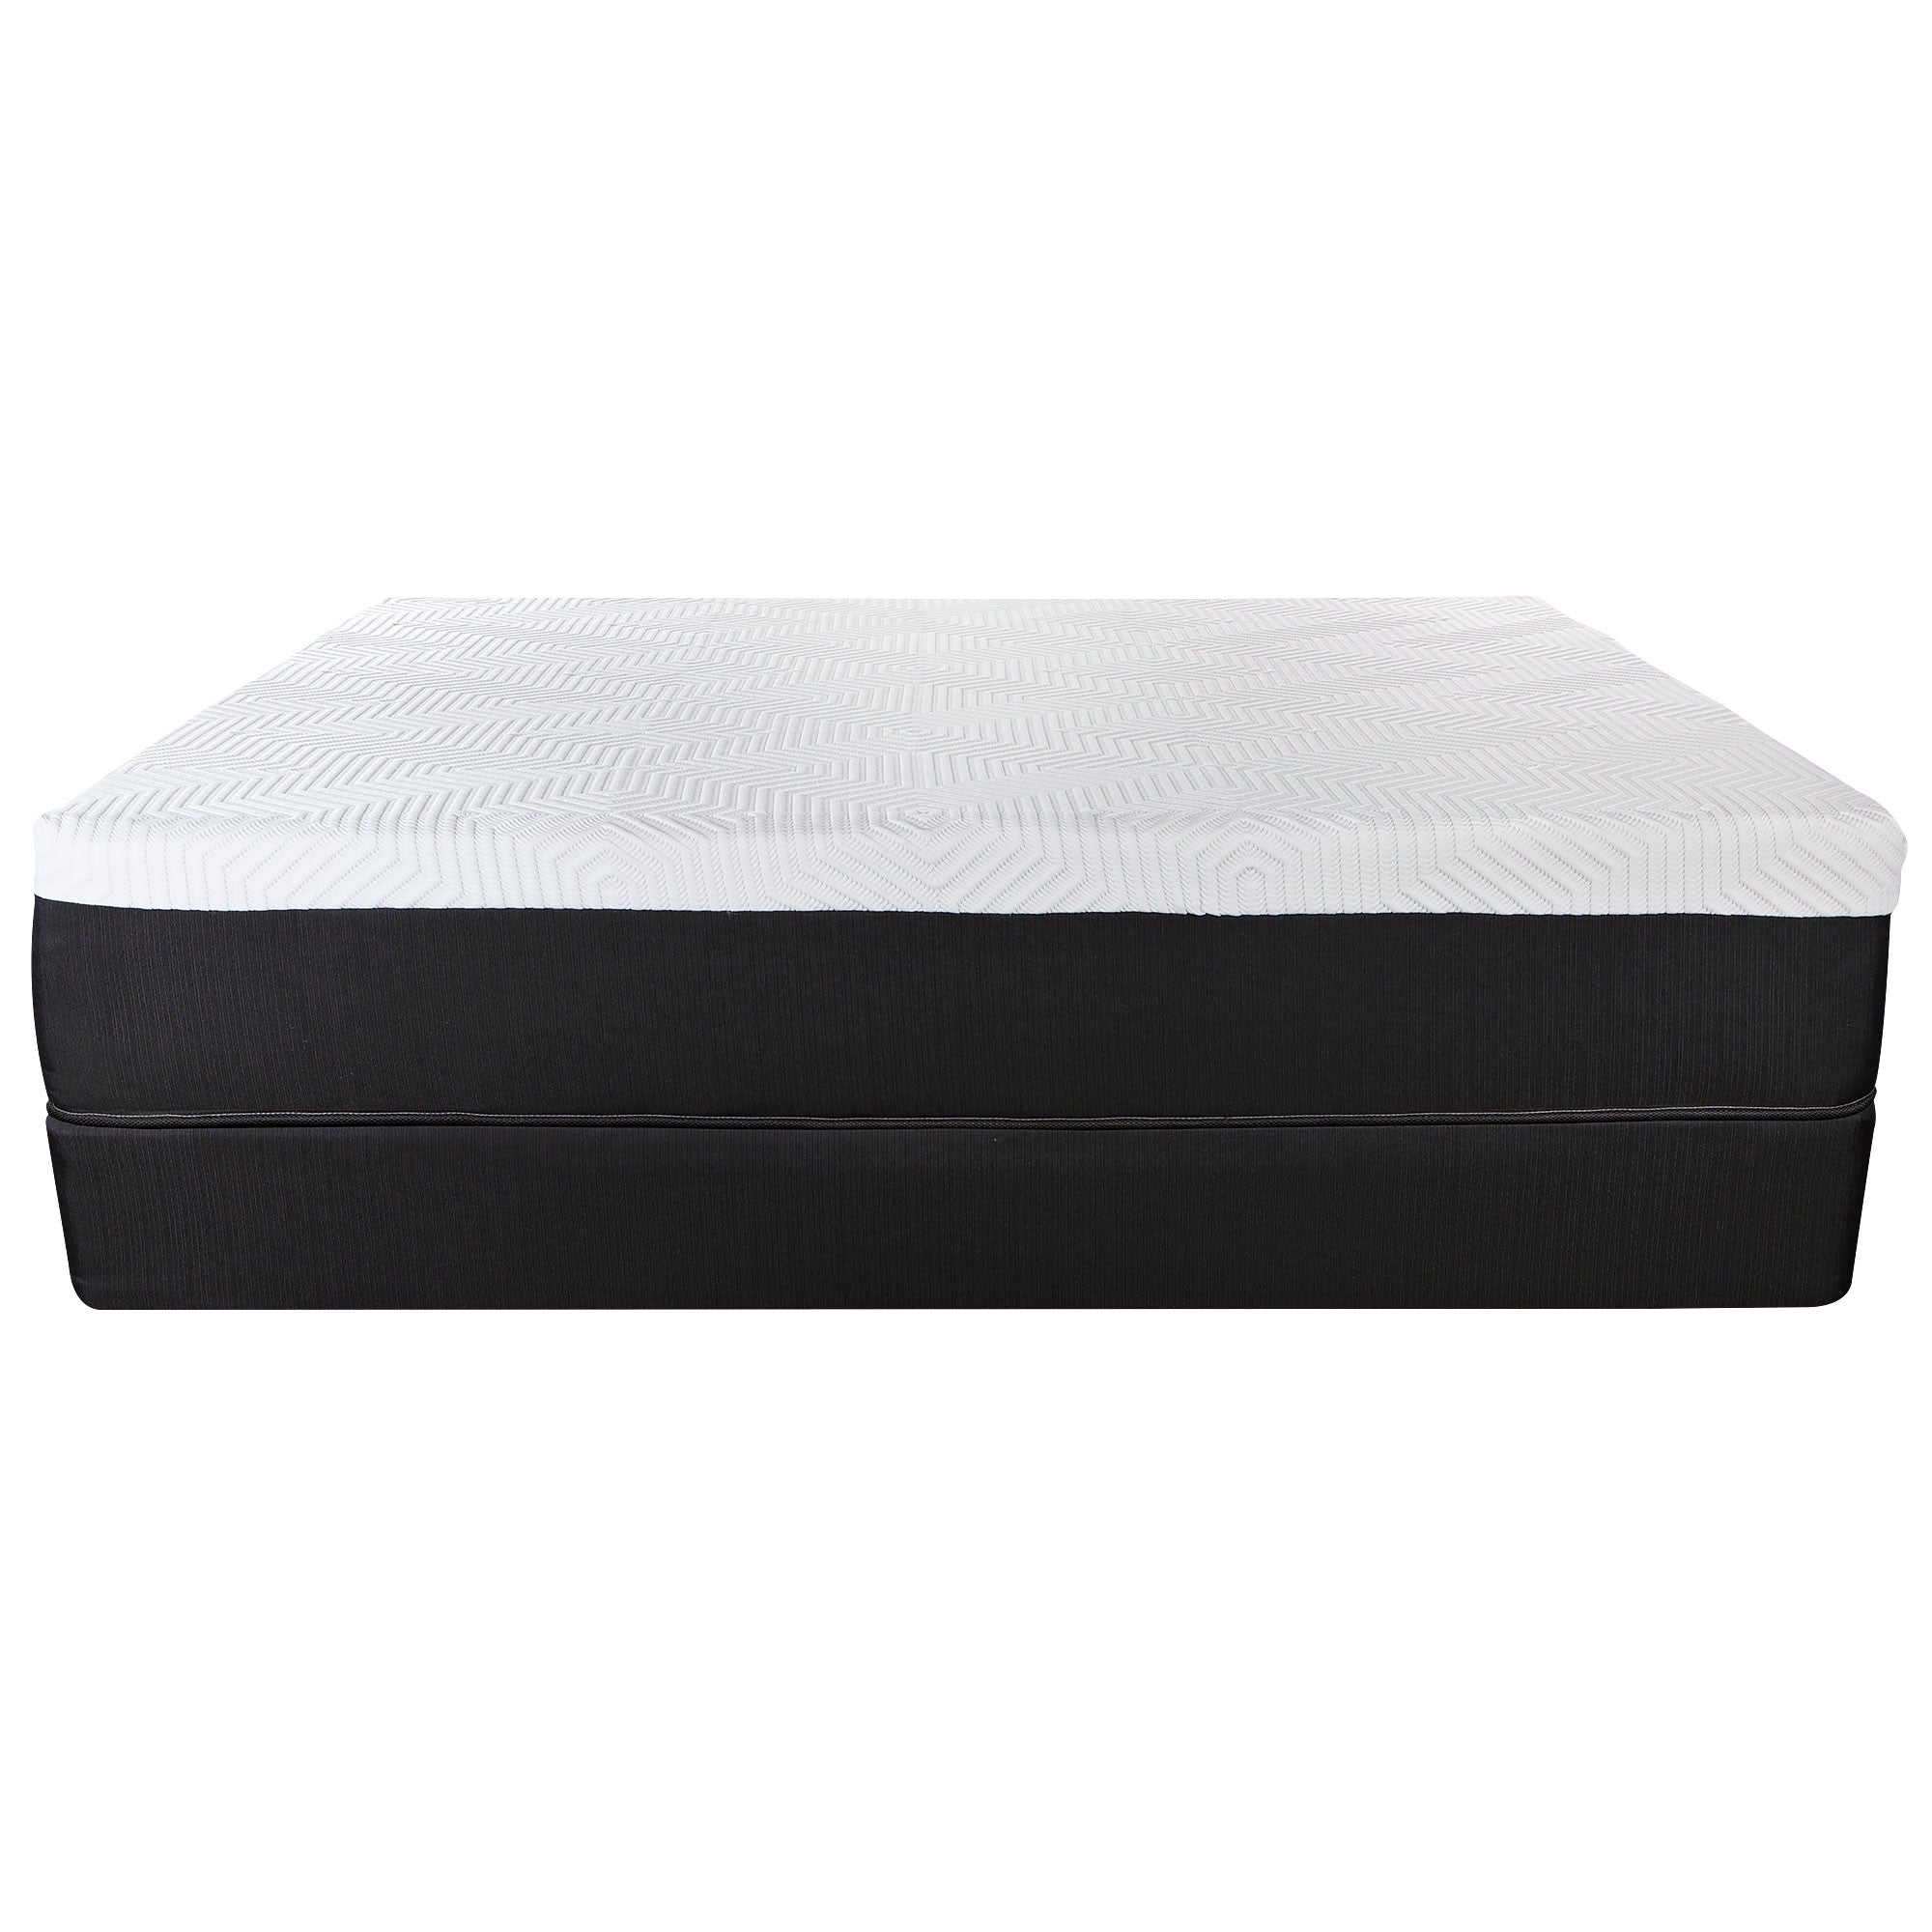 13' Hybrid Lux Memory Foam and Wrapped Coil Mattress Twin